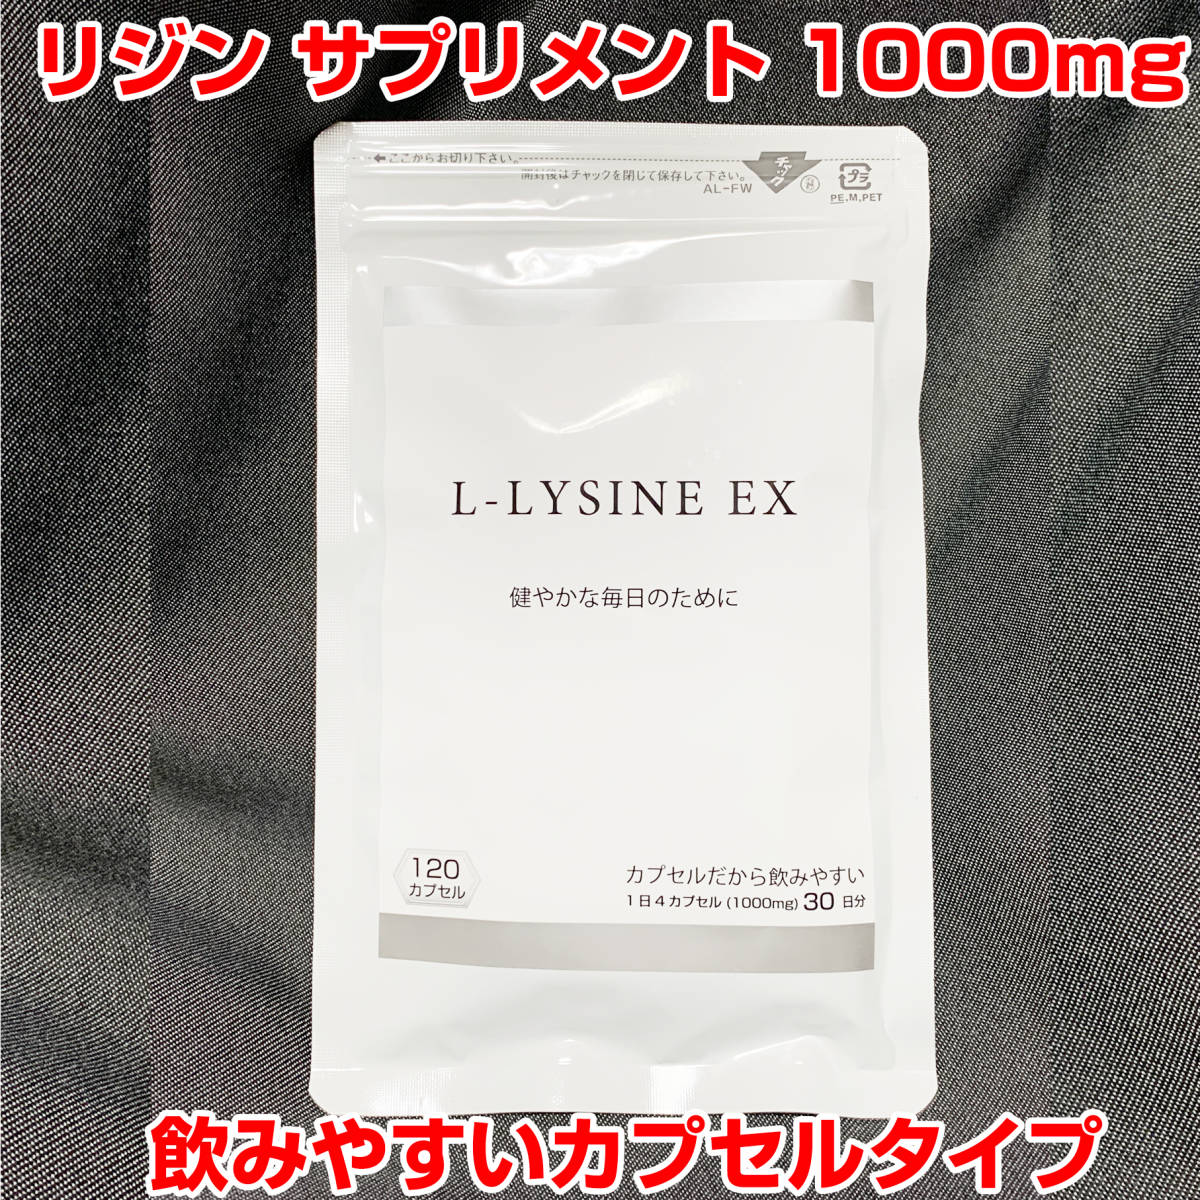 [ limited amount ][ domestic production ] Rige n supplement [ Capsule therefore .....]L-LYSINE EX L- Rige n[ domestic manufacture ] coloring charge * preservation charge un- use 